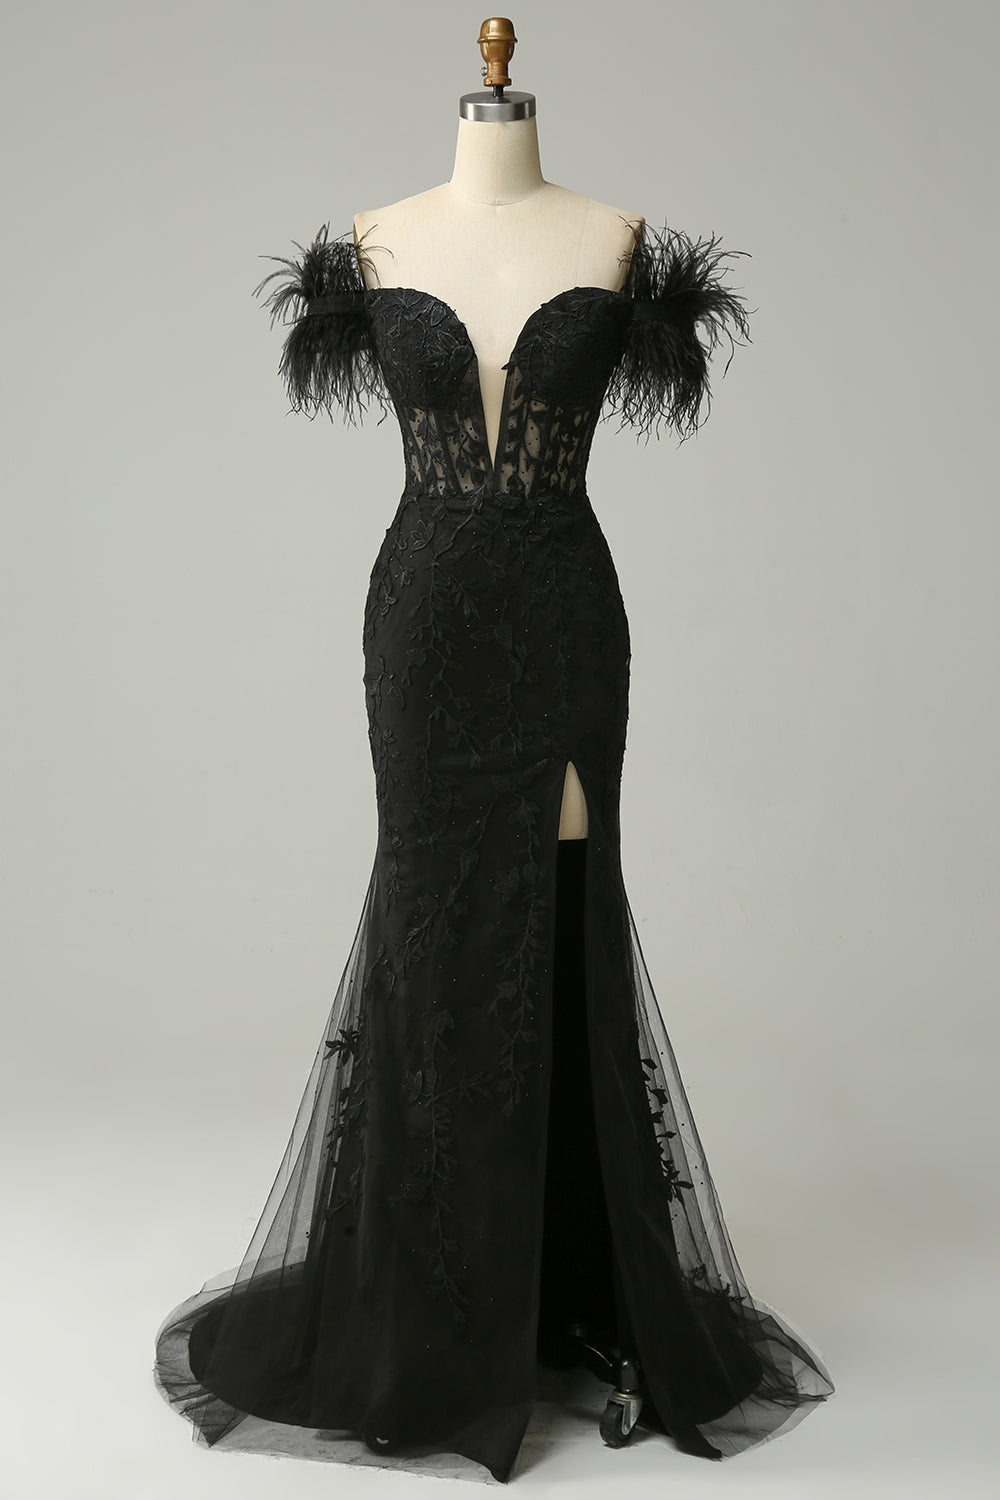 Black Plunging Off-the-Shoulder Feathers Mermaid Long Prom Dress with Slit